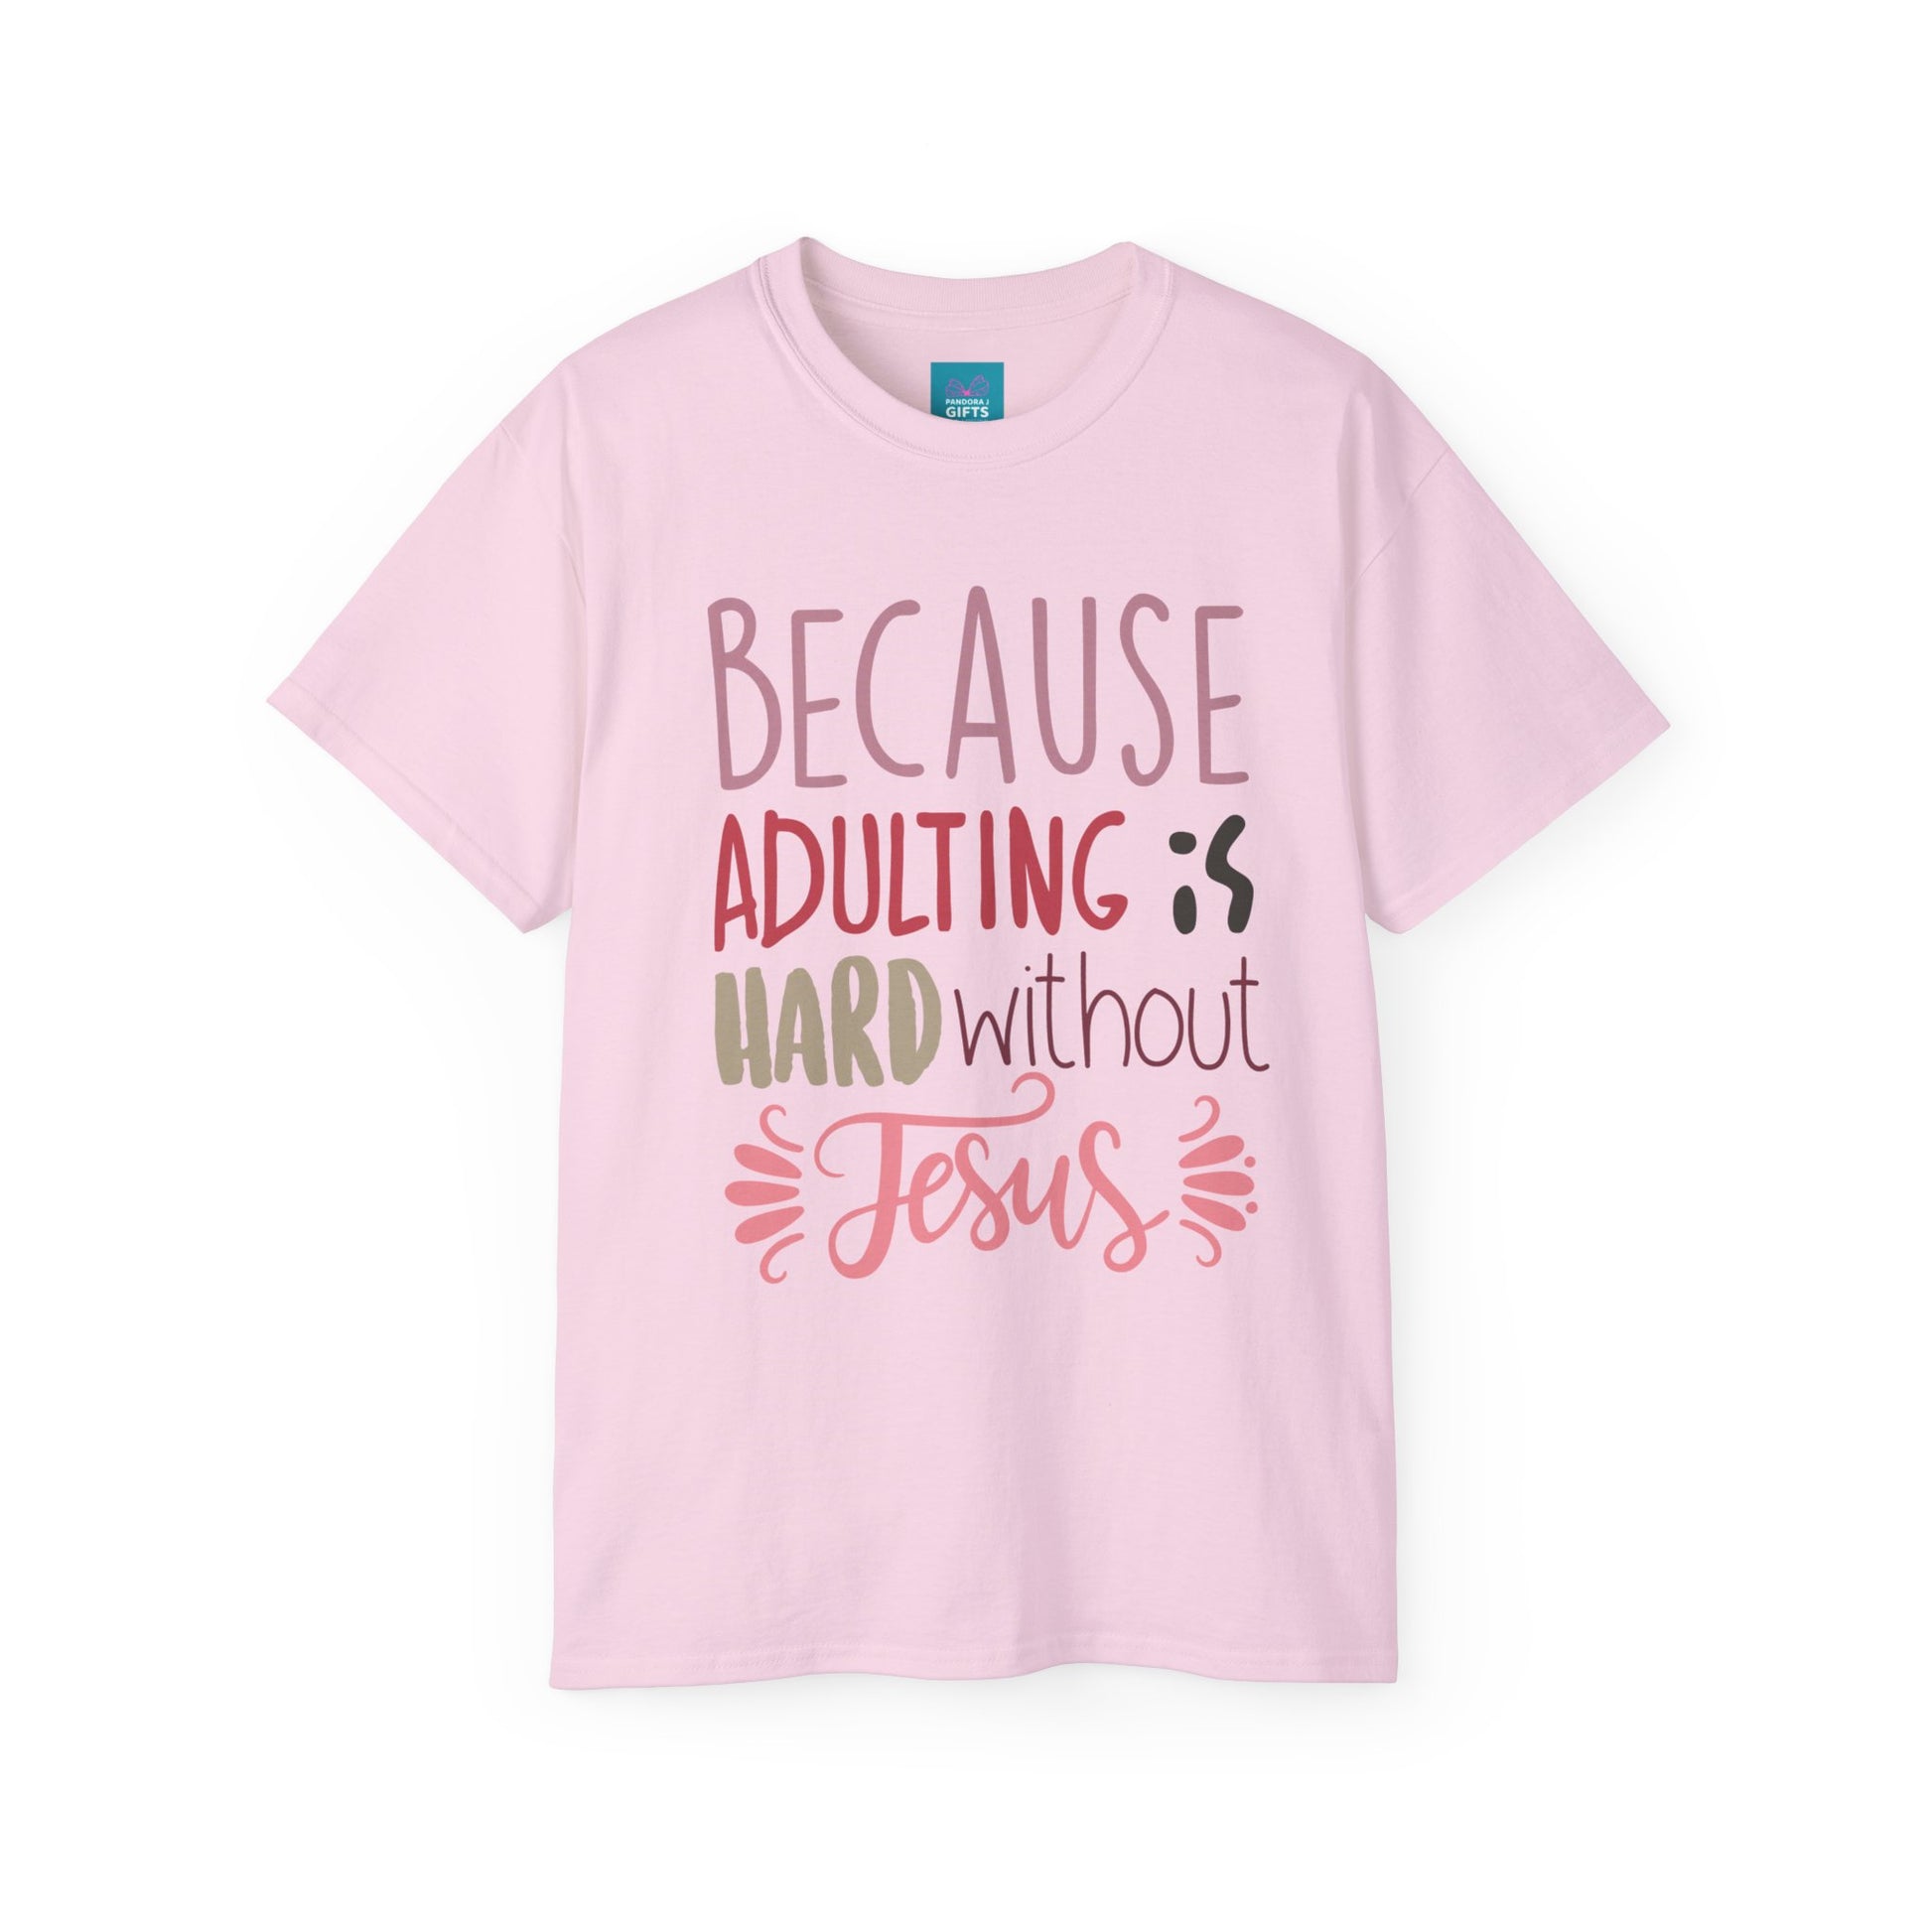 Pink shirt with words "Because Adulting is Hard without Jesus"